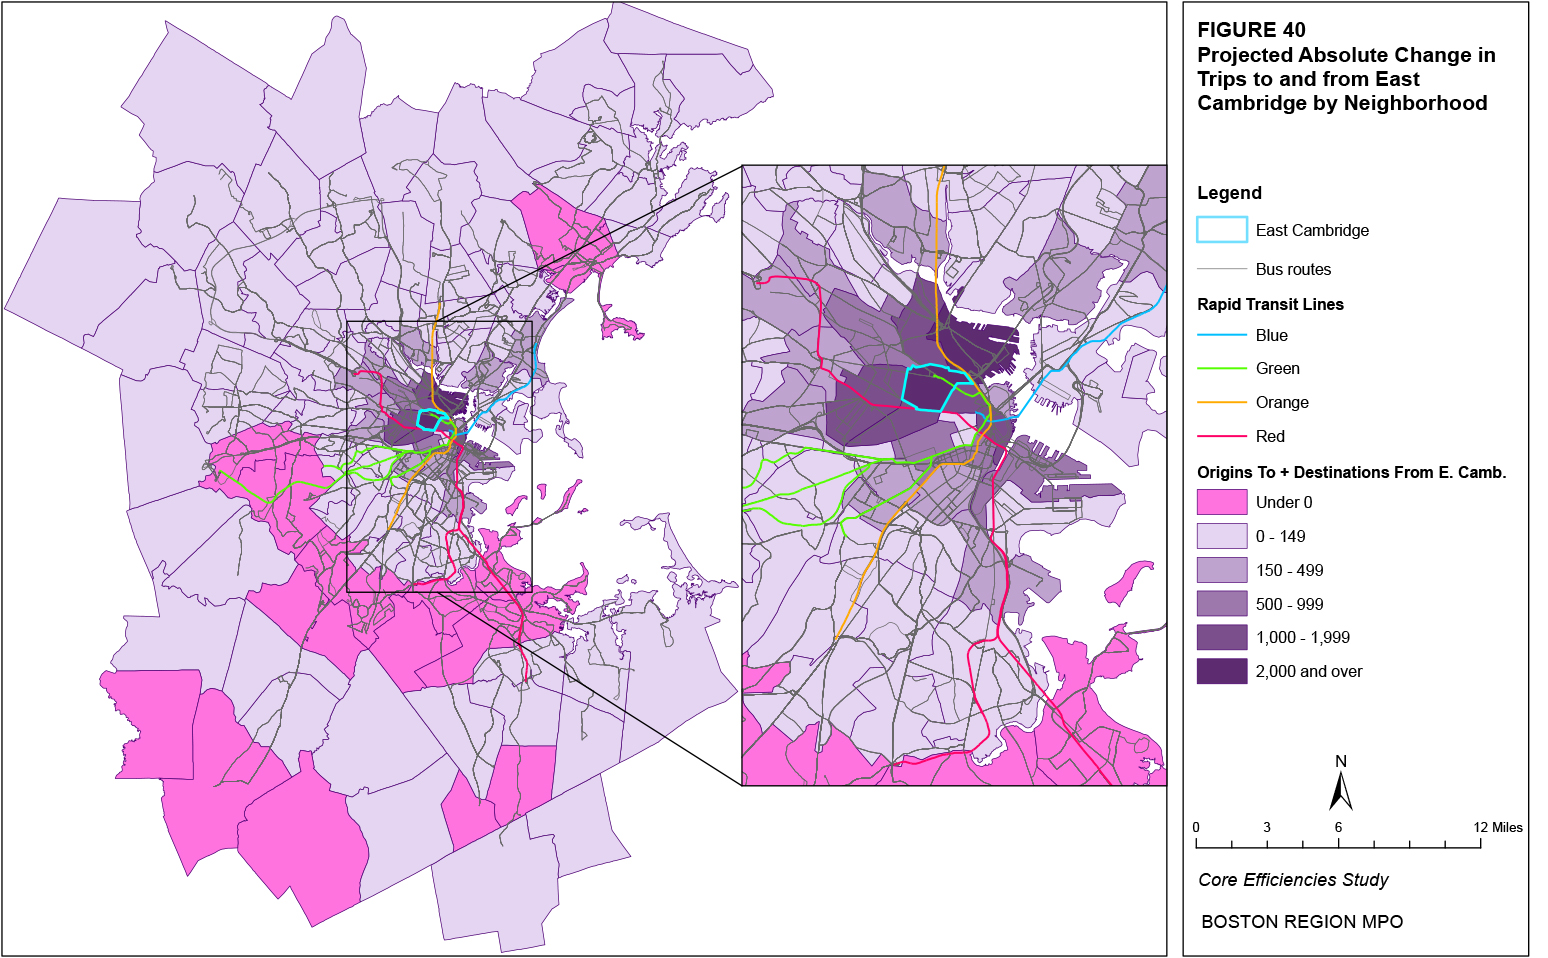 This map shows the projected absolute change in trips to and from the East Cambridge neighborhood by neighborhood.